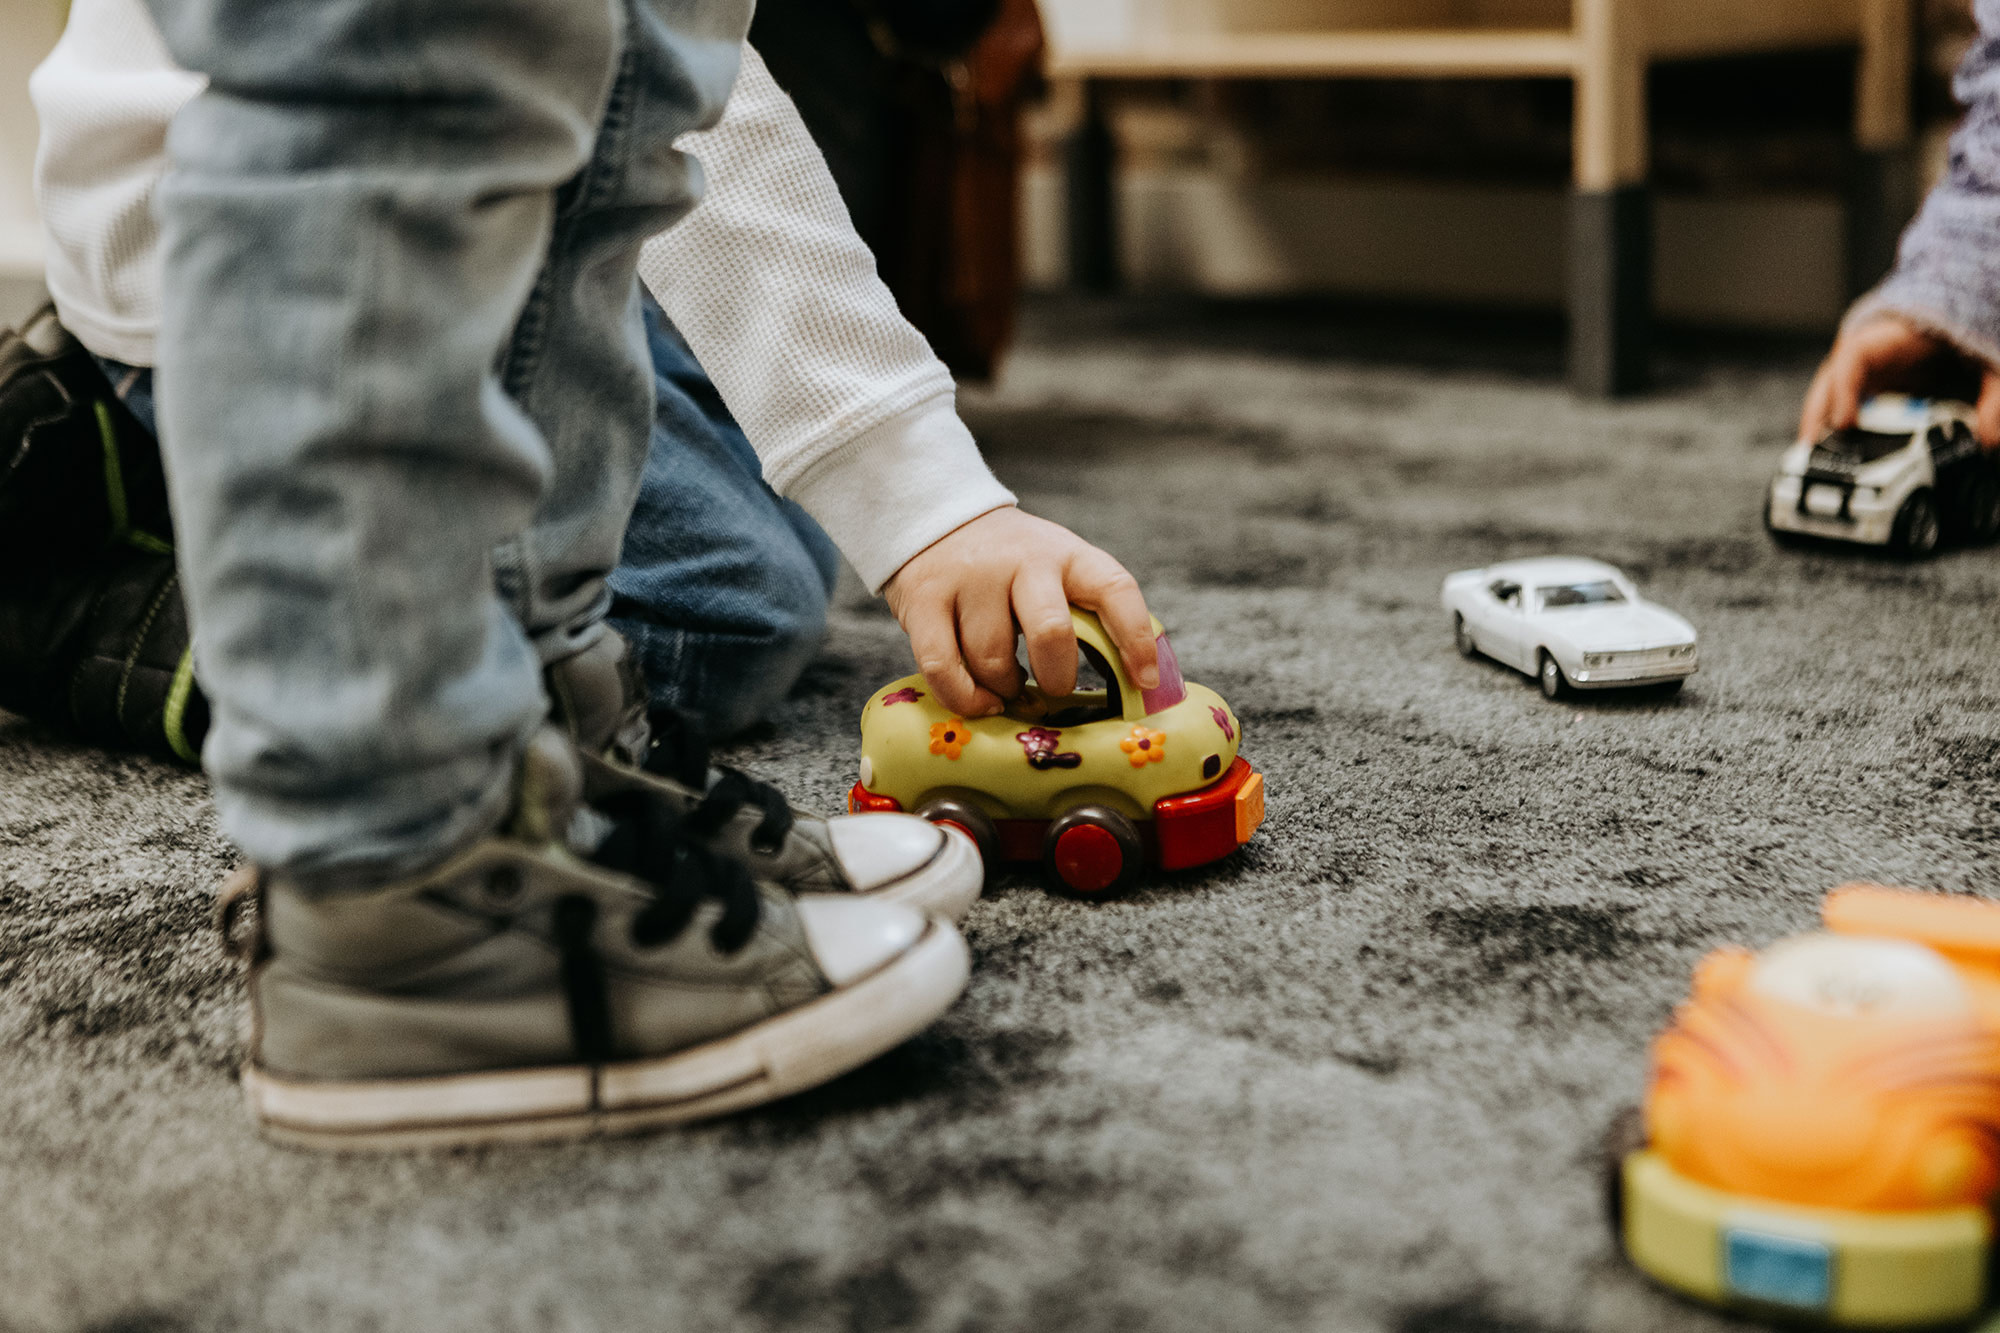 Children playing with toy cars